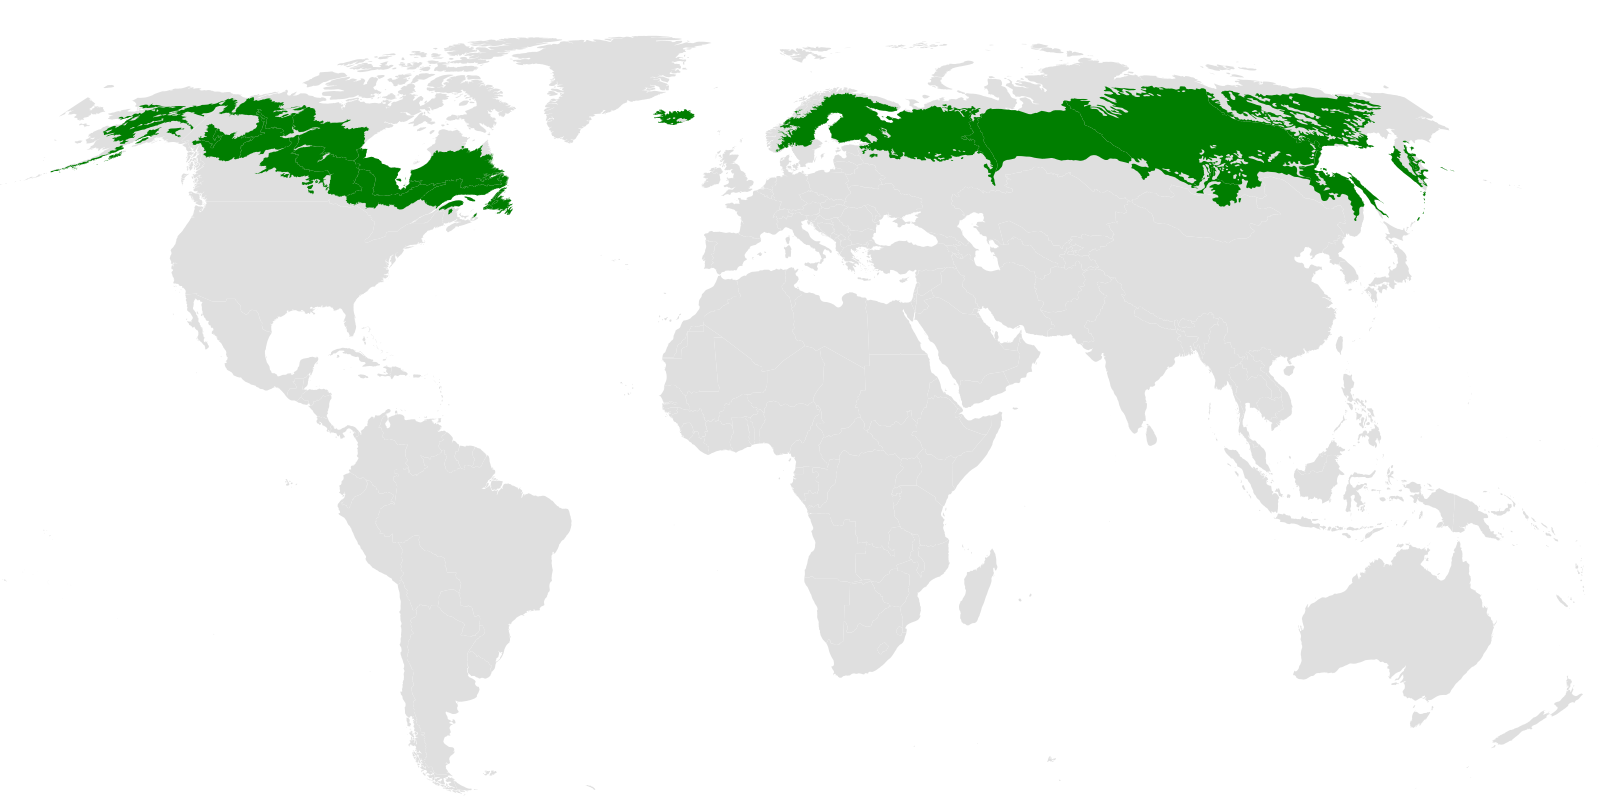 World map shading where the tiaga biome is locates (Northern parts of: Canada, Alaska, Europe, Iceland, and Russia)